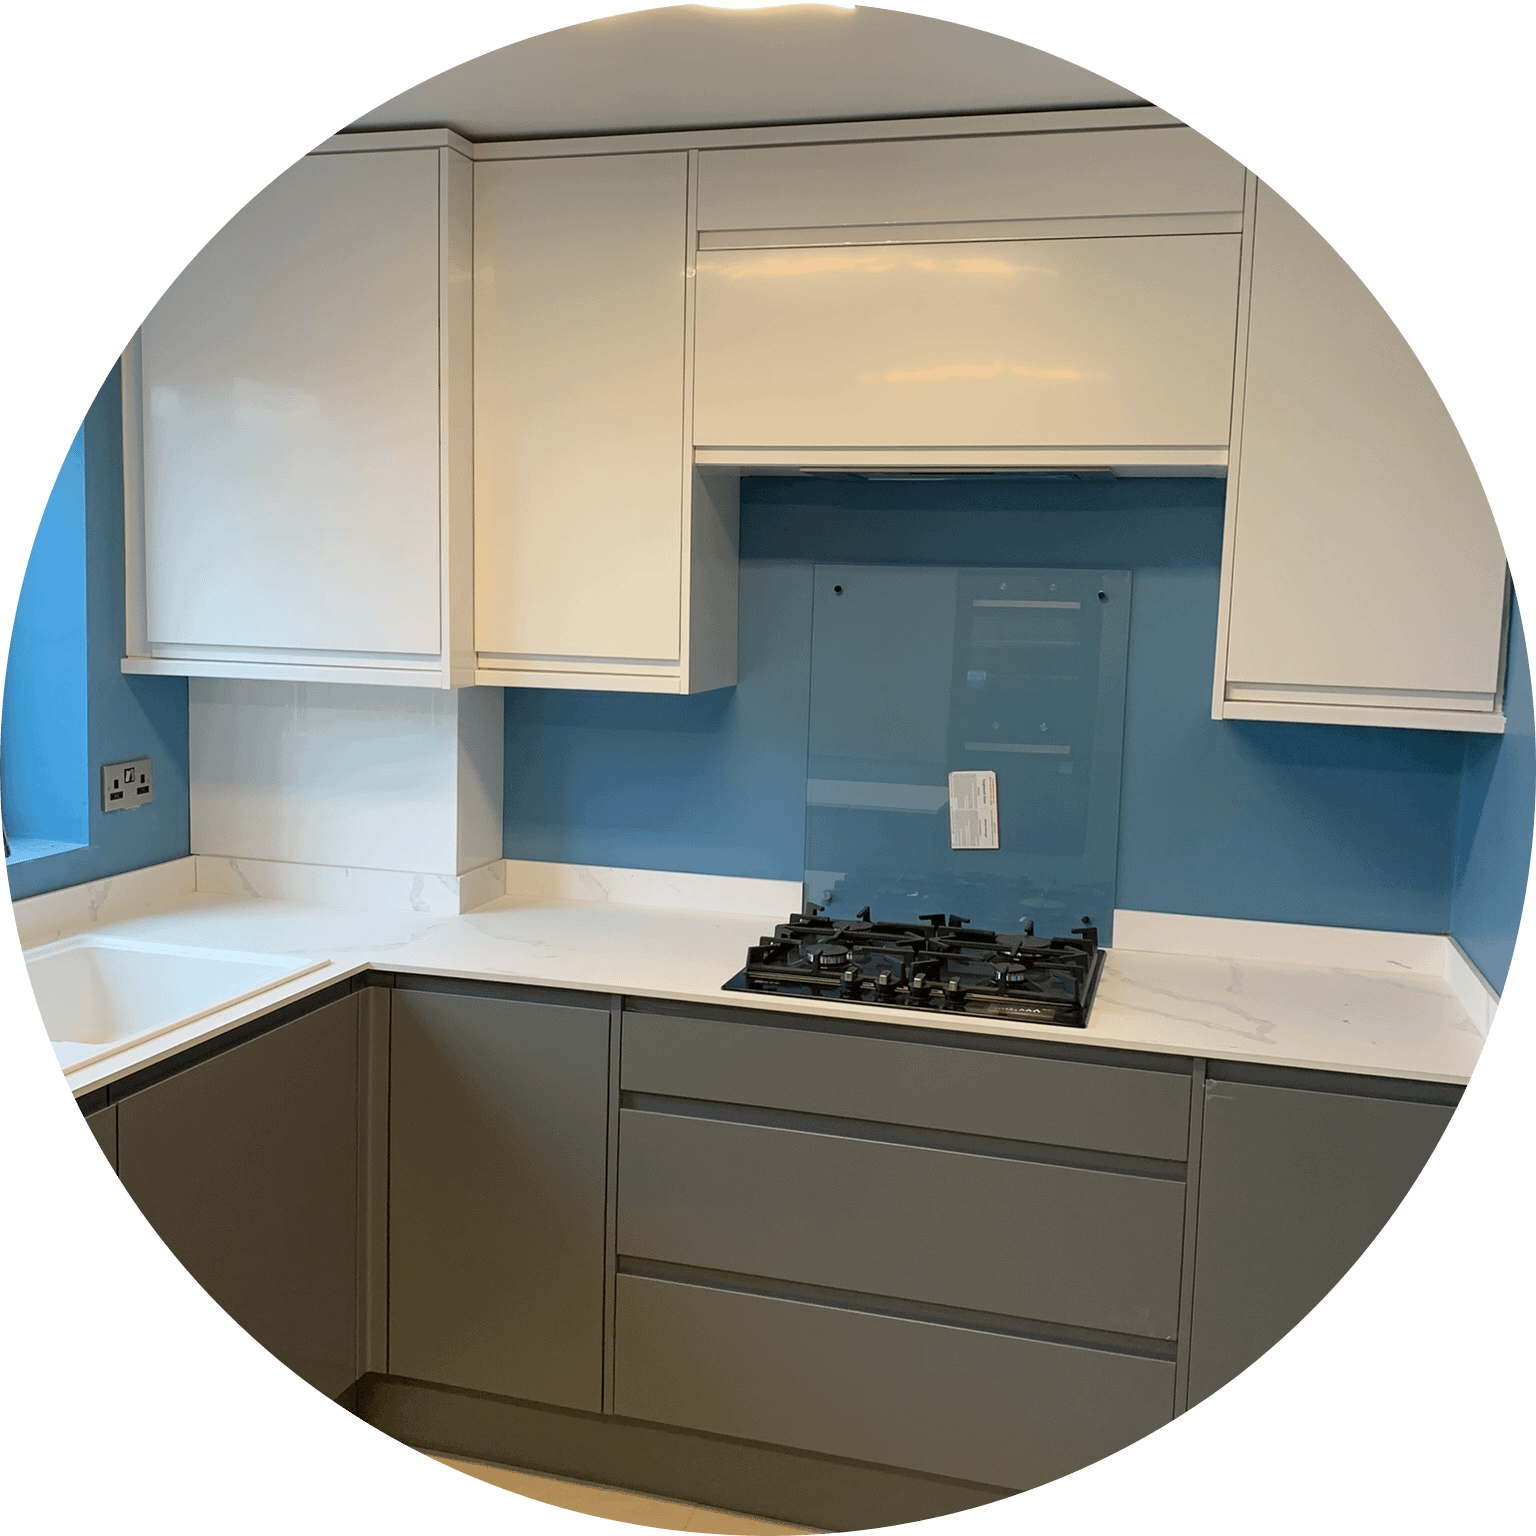 Lancashire based Experienced Kitchen Fitter - Jones Kitchen Fitting & Joinery